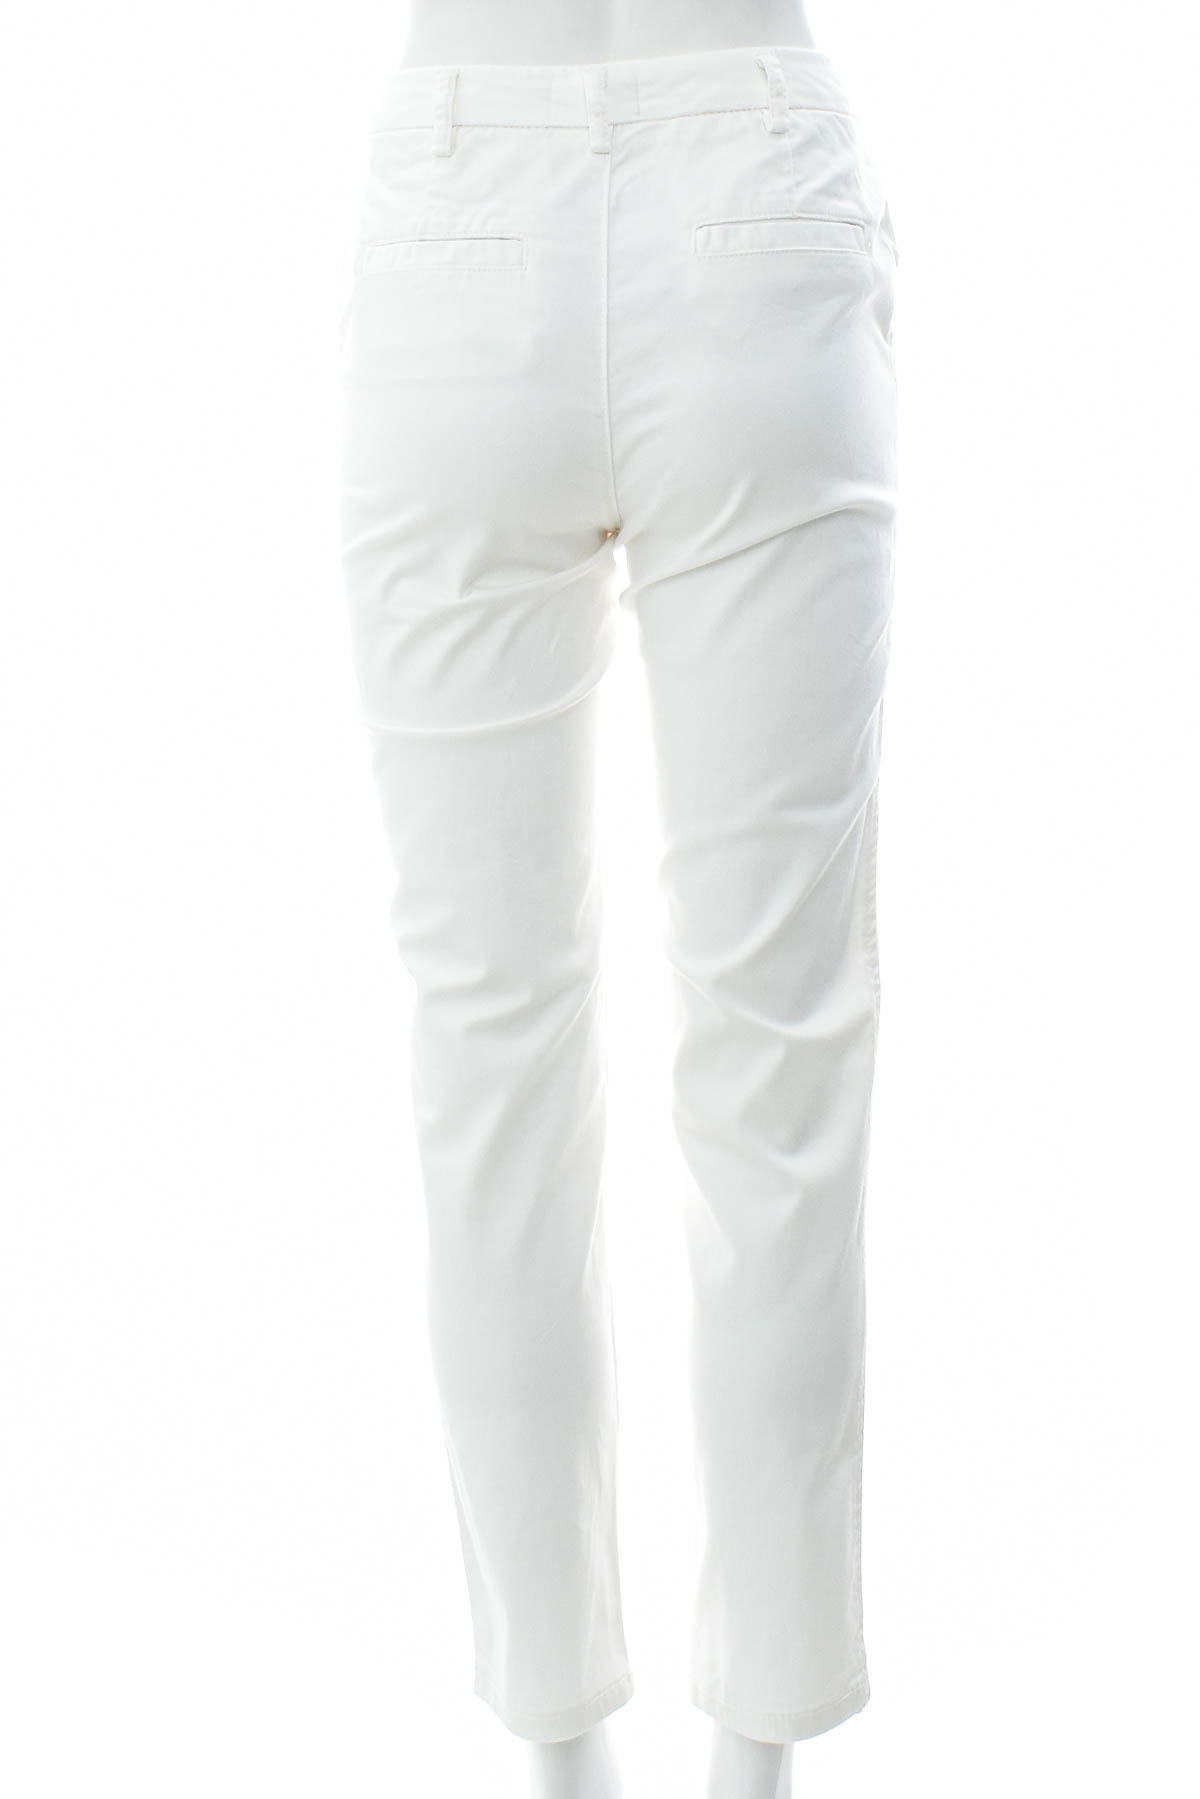 Women's trousers - United Colors of Benetton - 1